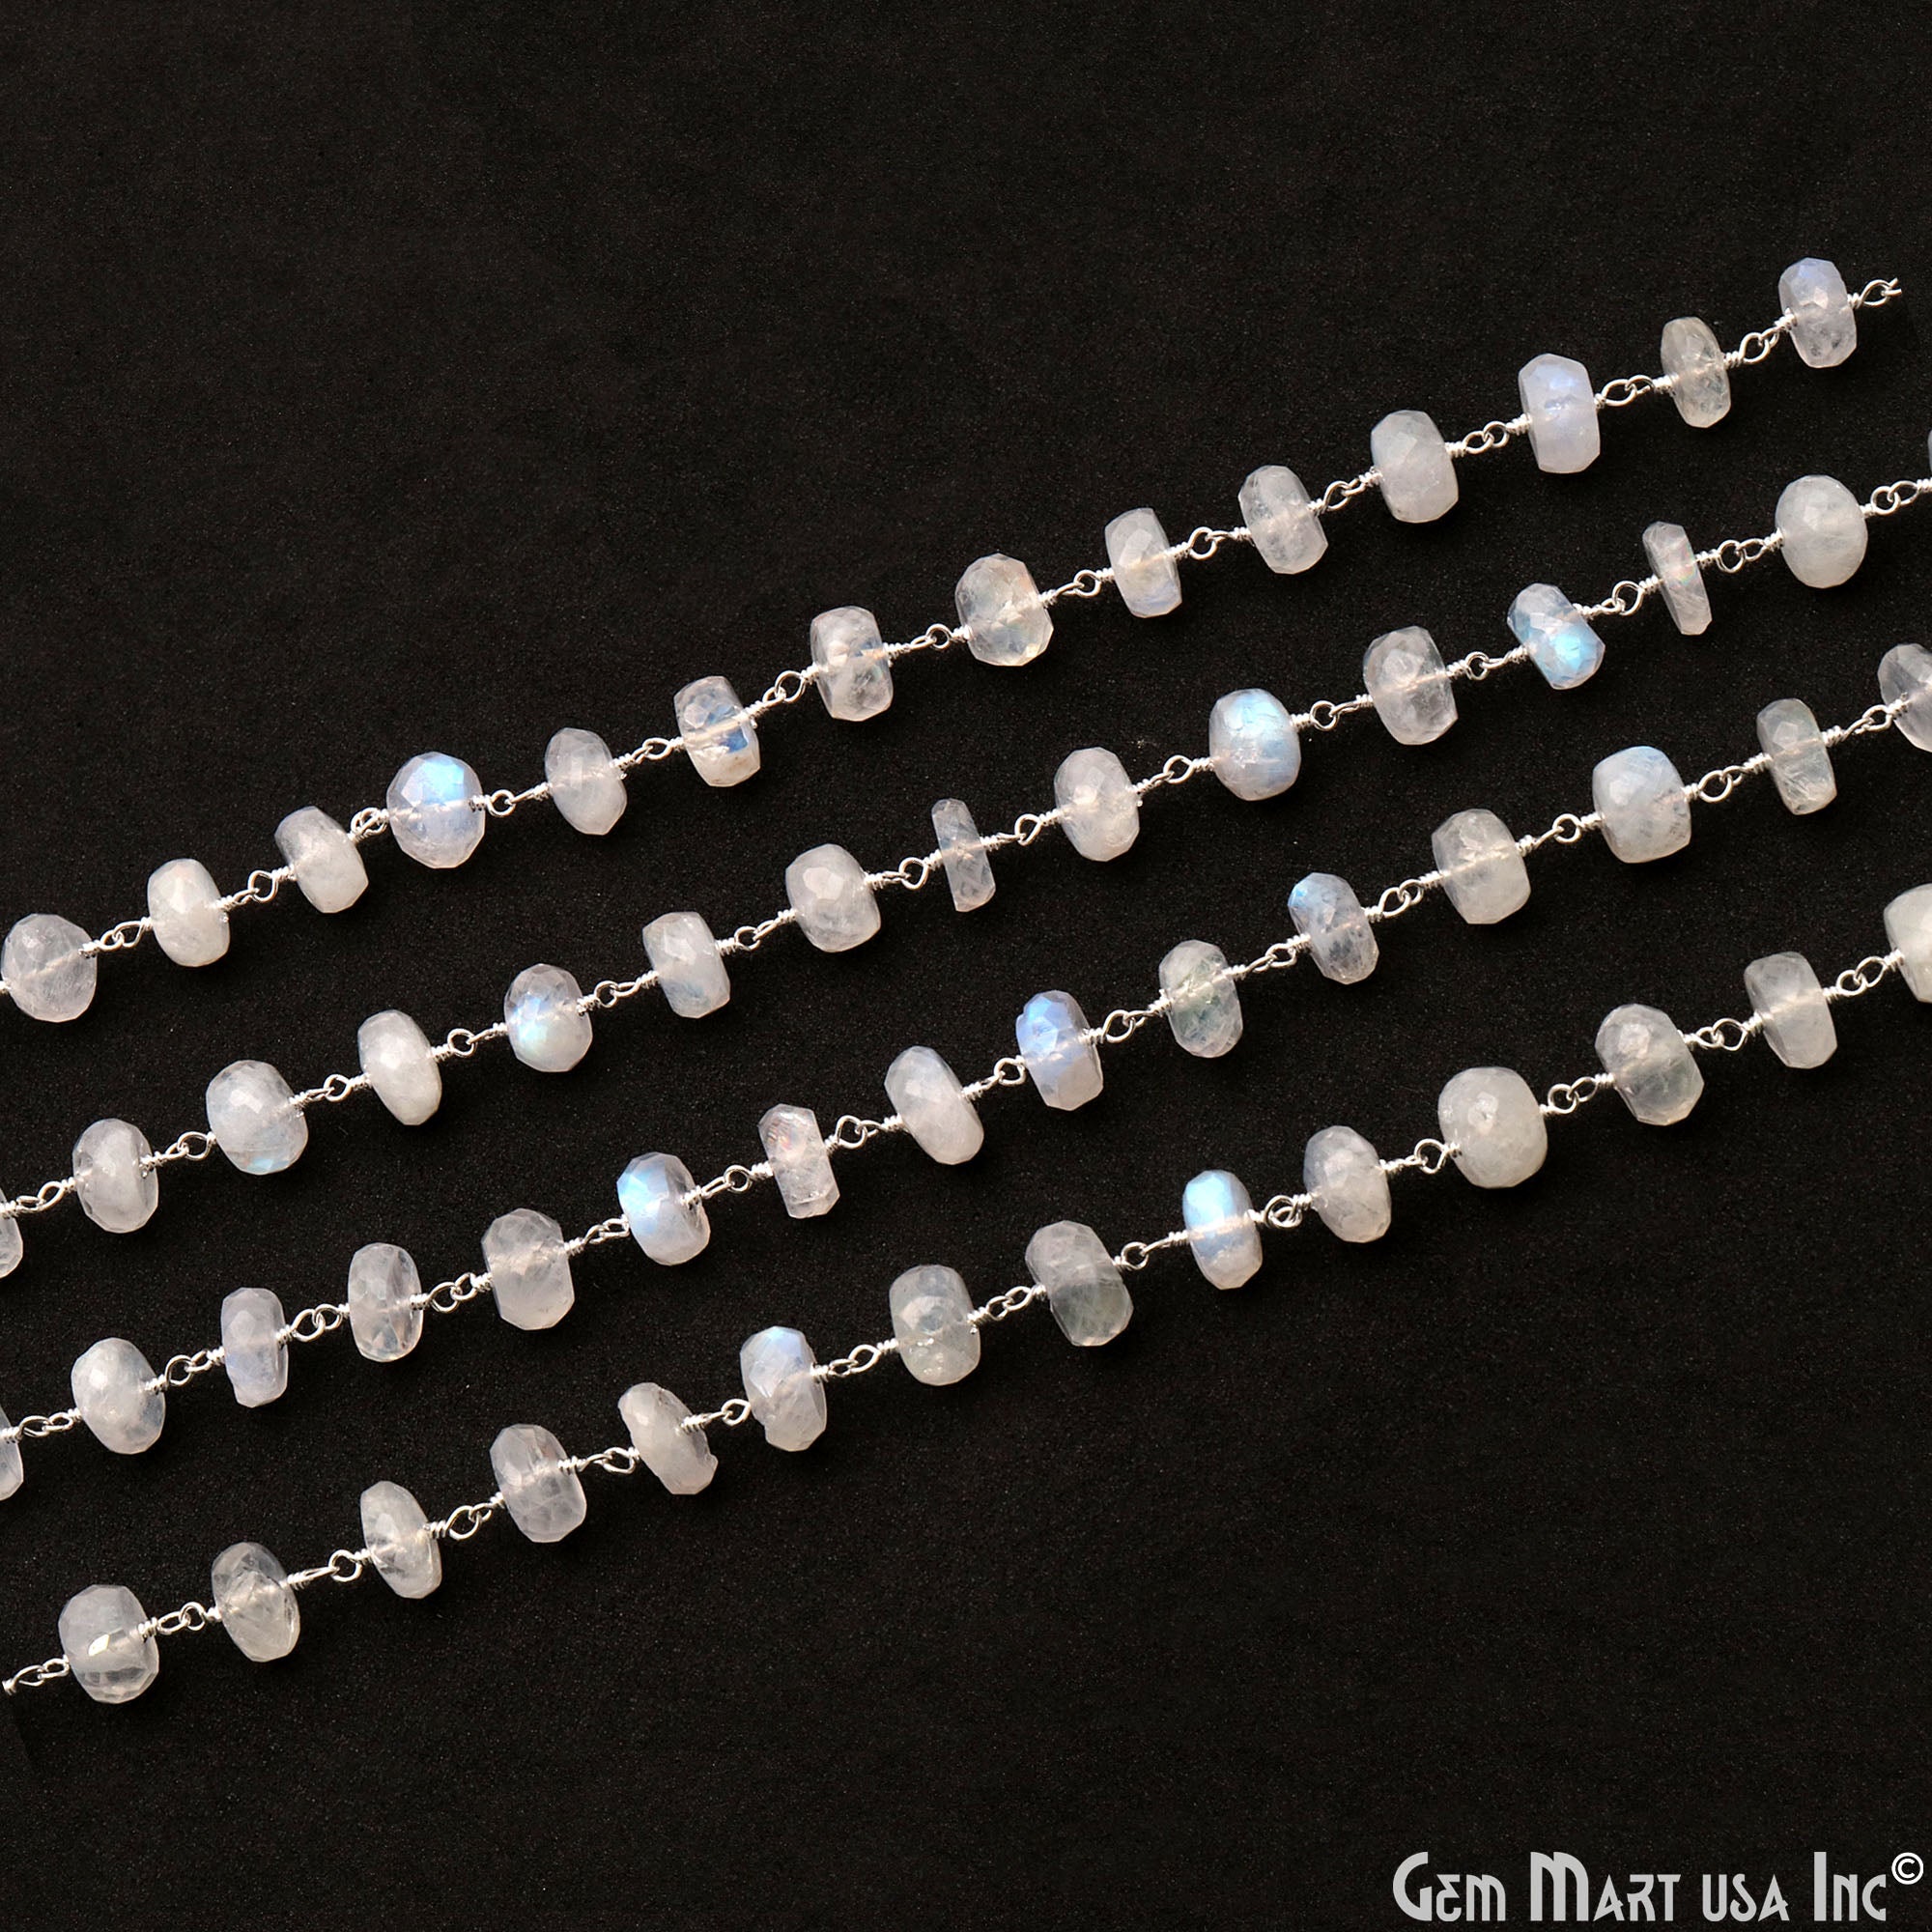 Rainbow Moonstone 7-8mm Silver Plated Wire Wrapped Beads Rosary Chain (763703230511)